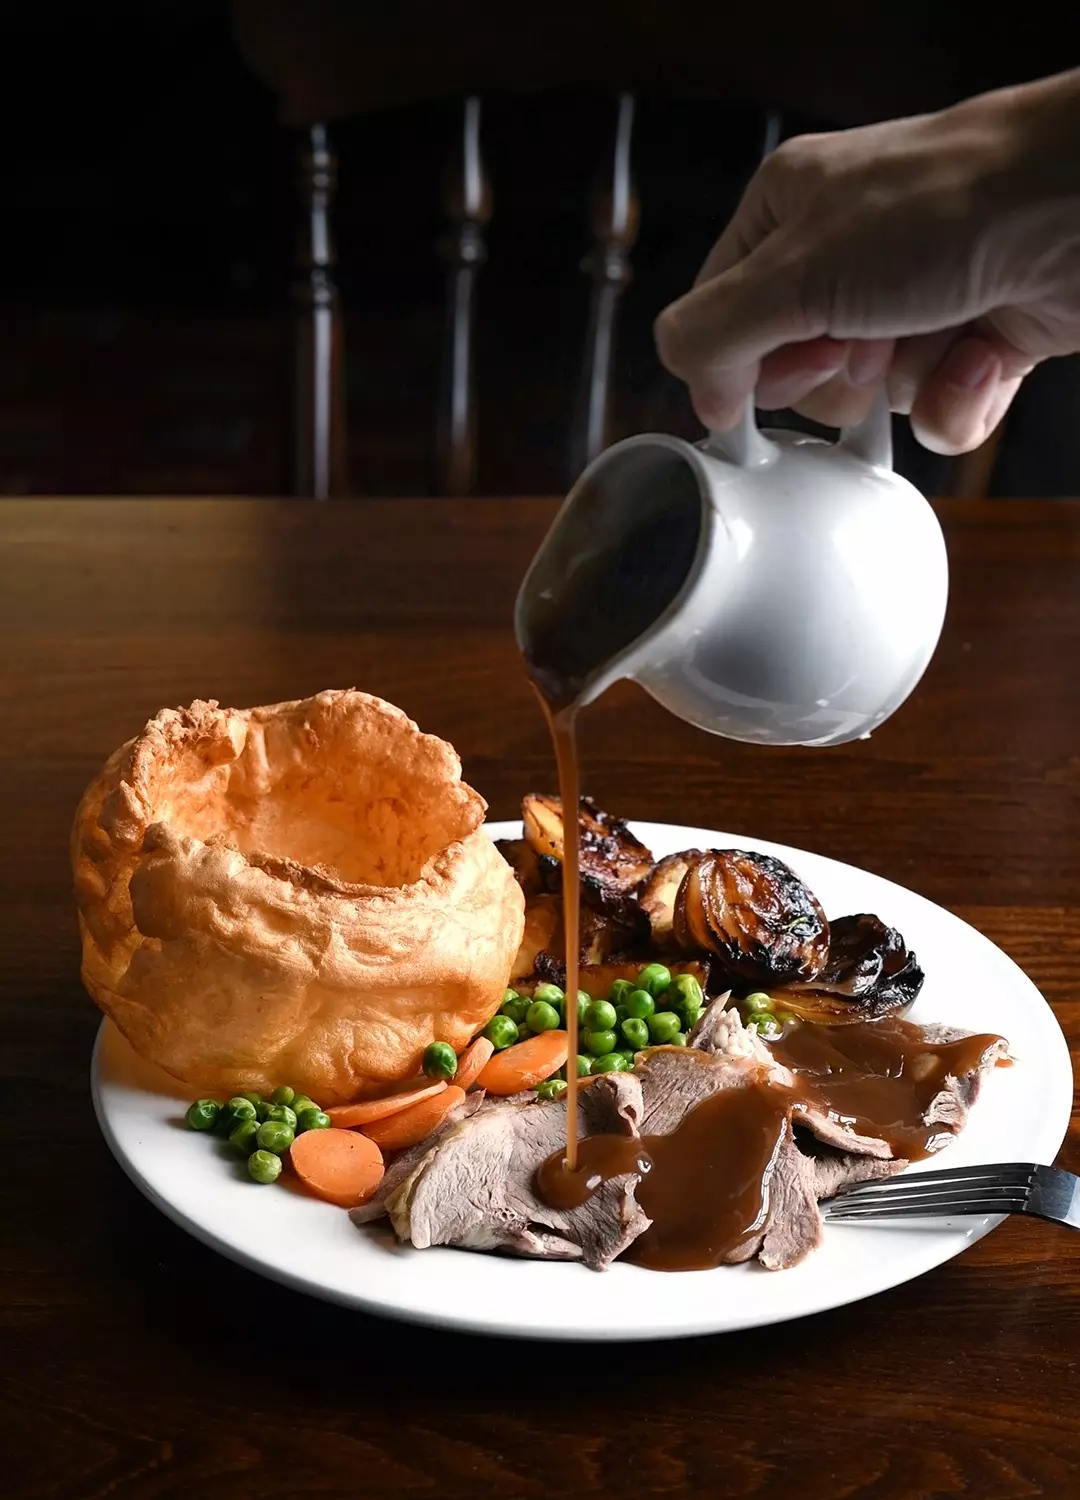 A free roast on Mother's Day? I wouldn't say no.